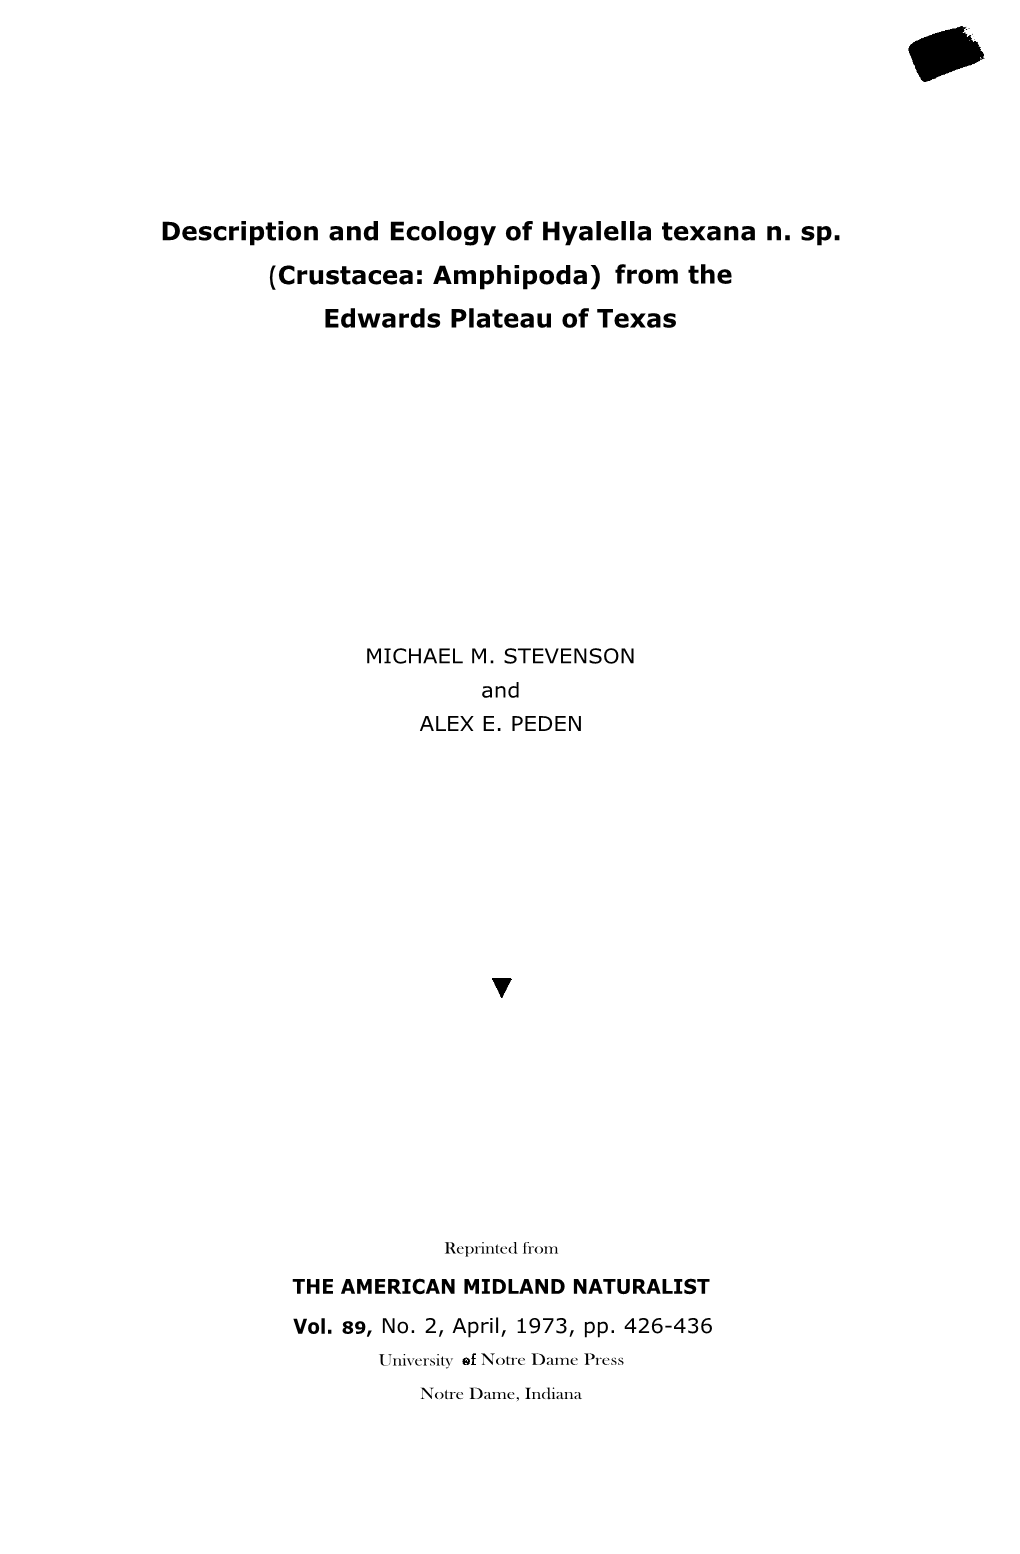 Description and Ecology of Hyalella Texana N. Sp. (Crustacea: Amphipoda) from the Edwards Plateau of Texas